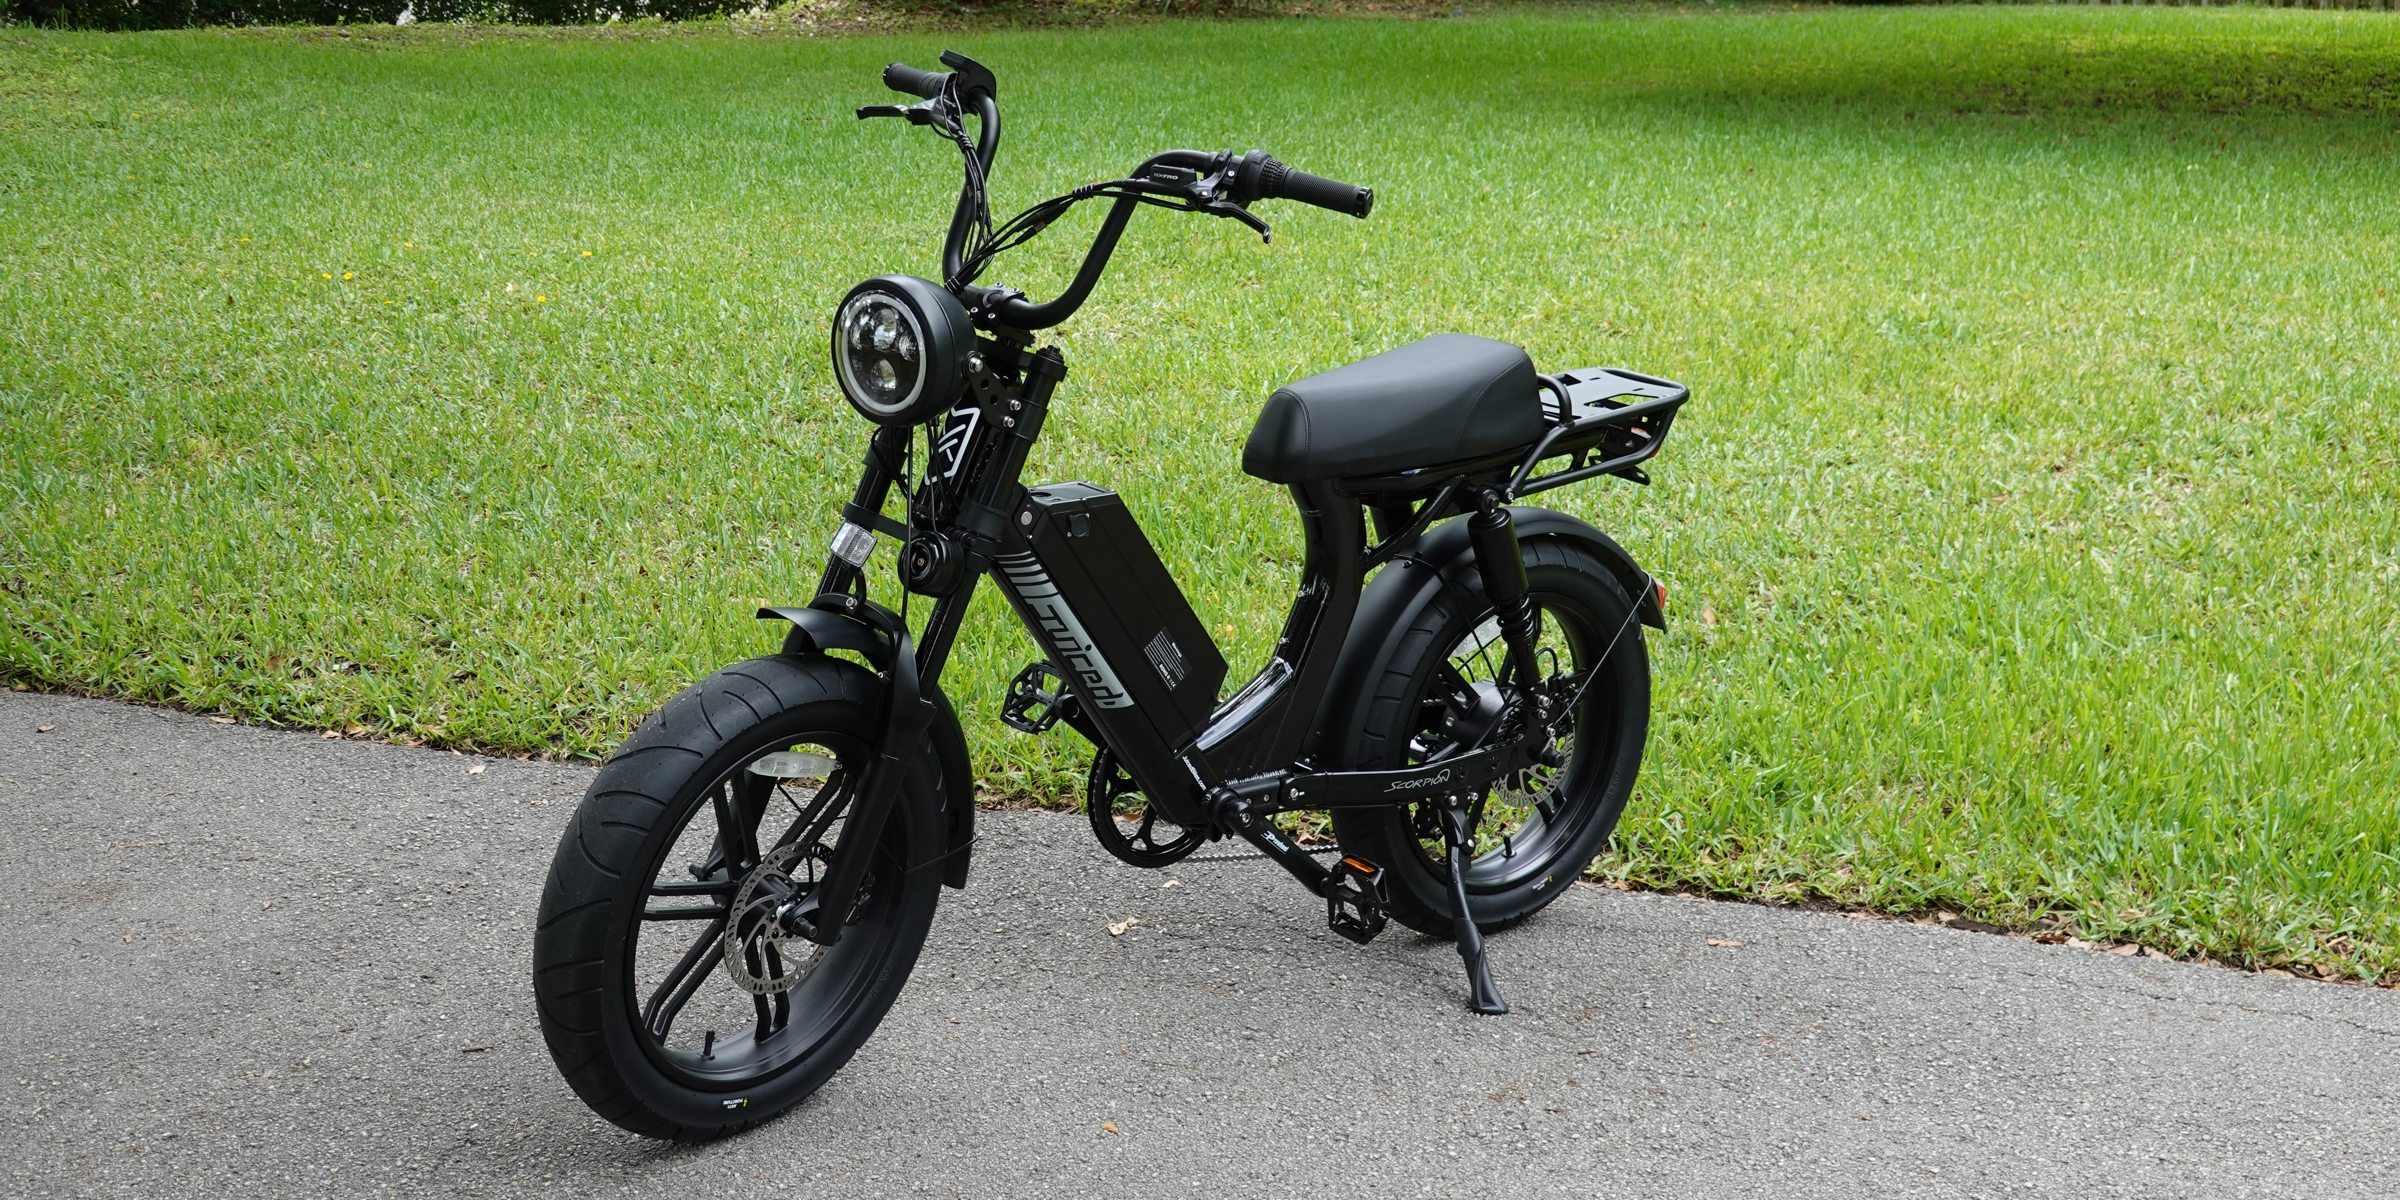 Juiced Scorpion electric bike review an affordable emoped with style!